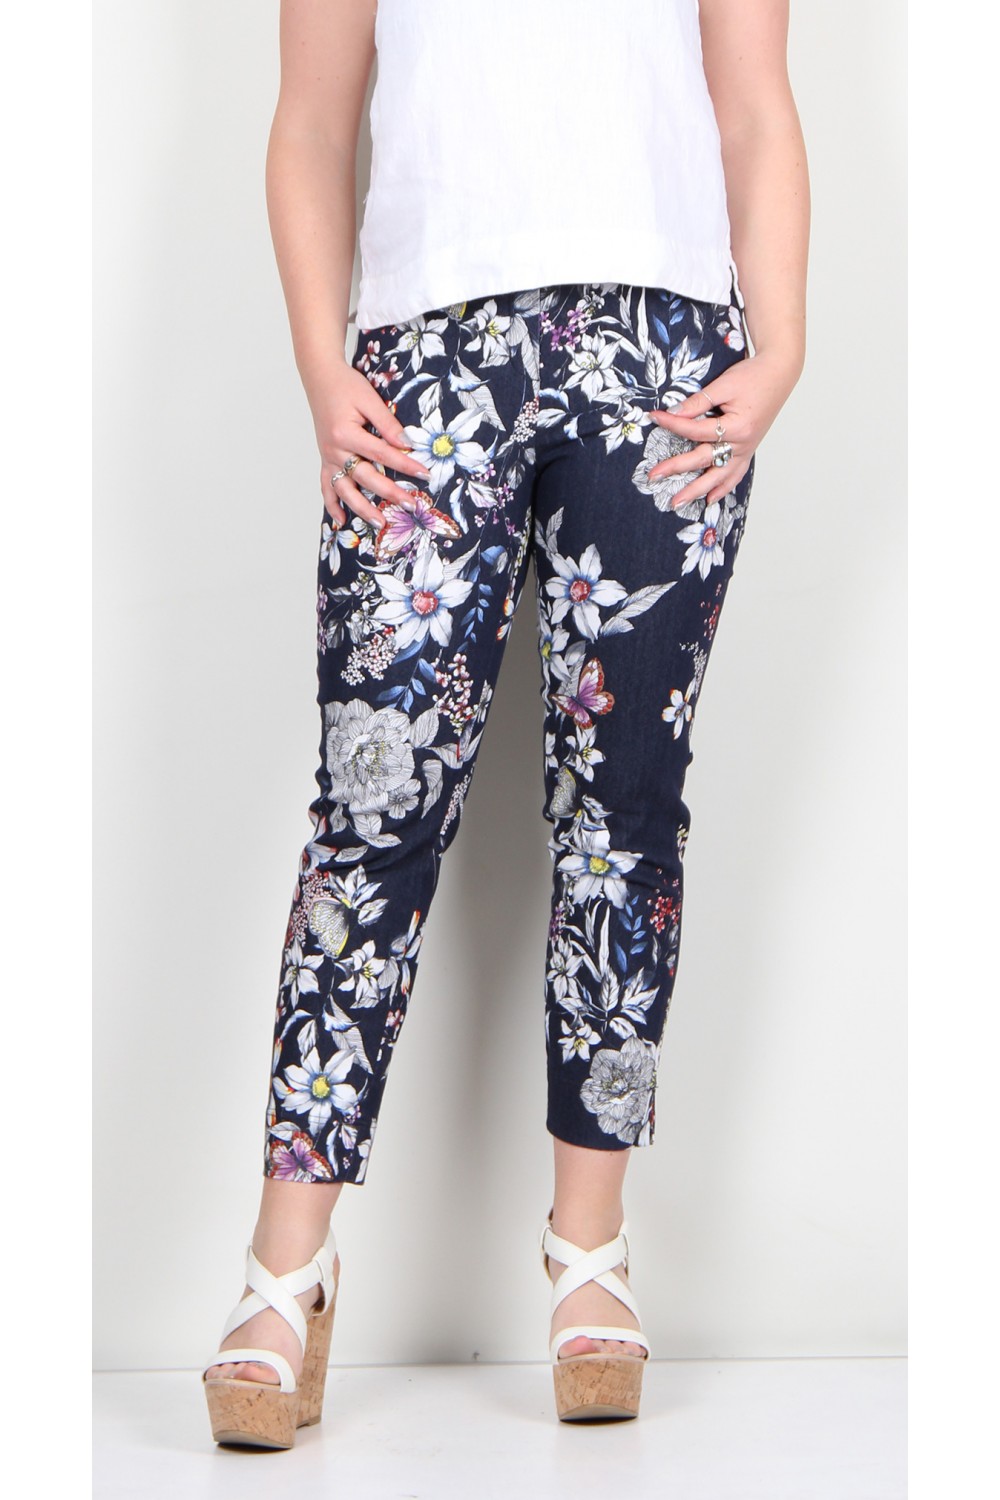 Robell Trousers Rose 09 Summer Floral Stretch Denim Jean Navy